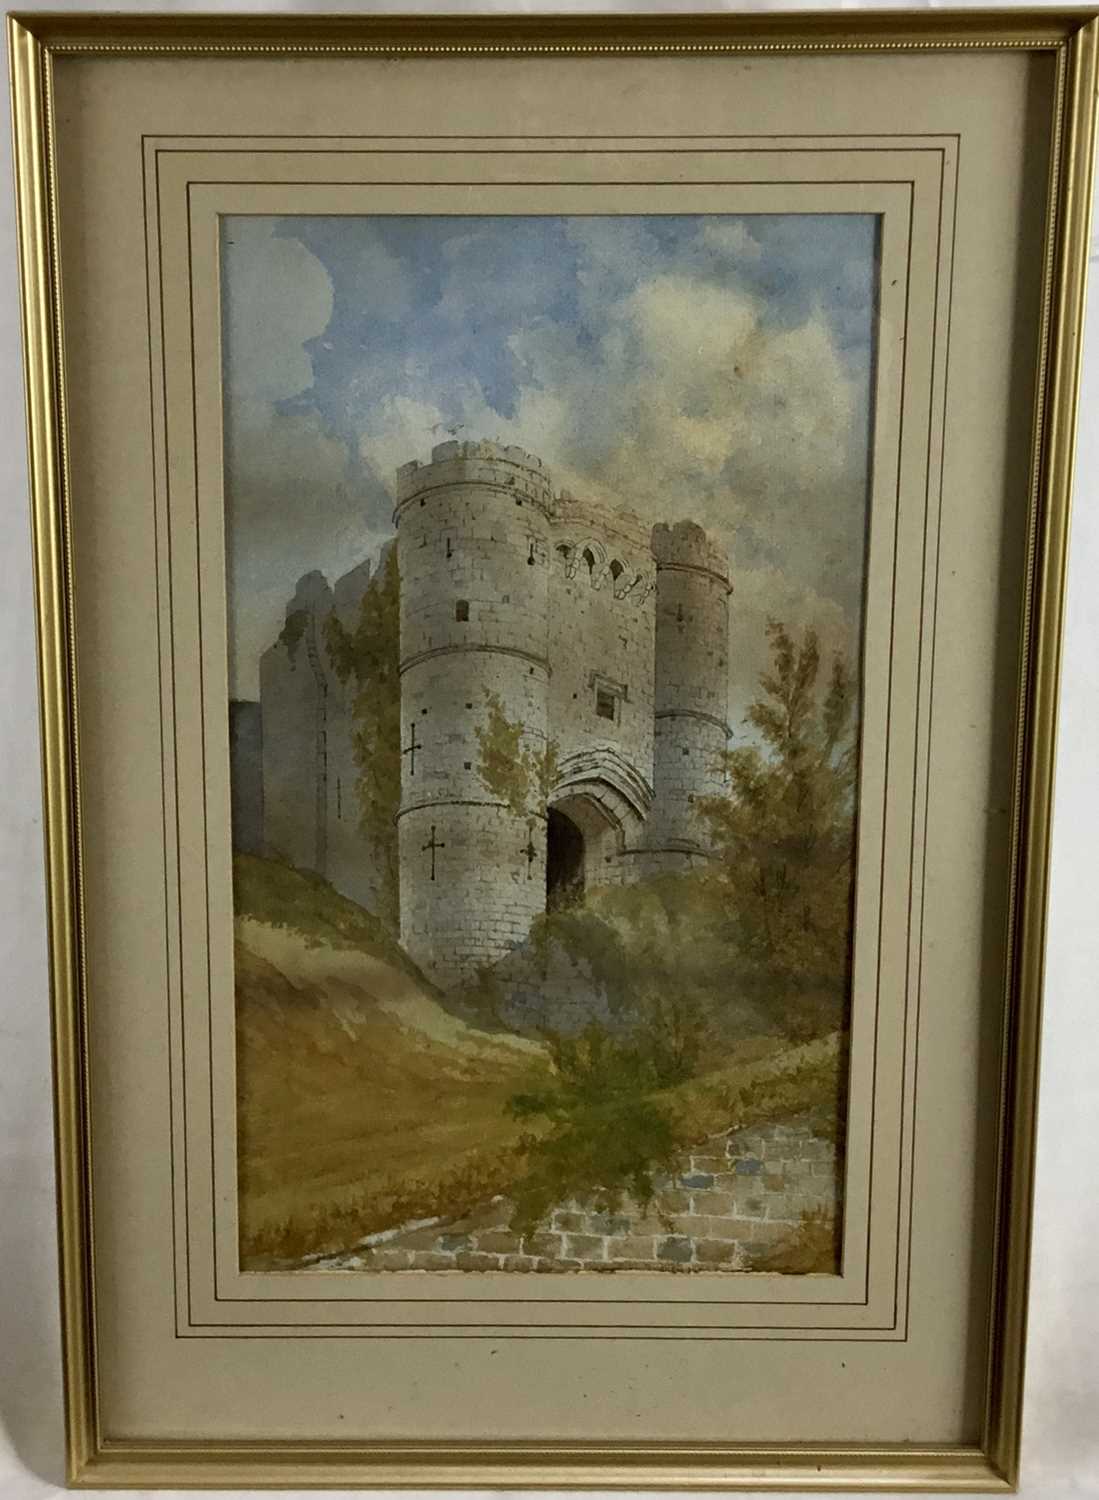 Lot 133 - Two watercolours of castles - the first 35cm x 20cm, signed Sugden 187?, the second 25cm x 35cm with monogram, both mounted in glazed frames